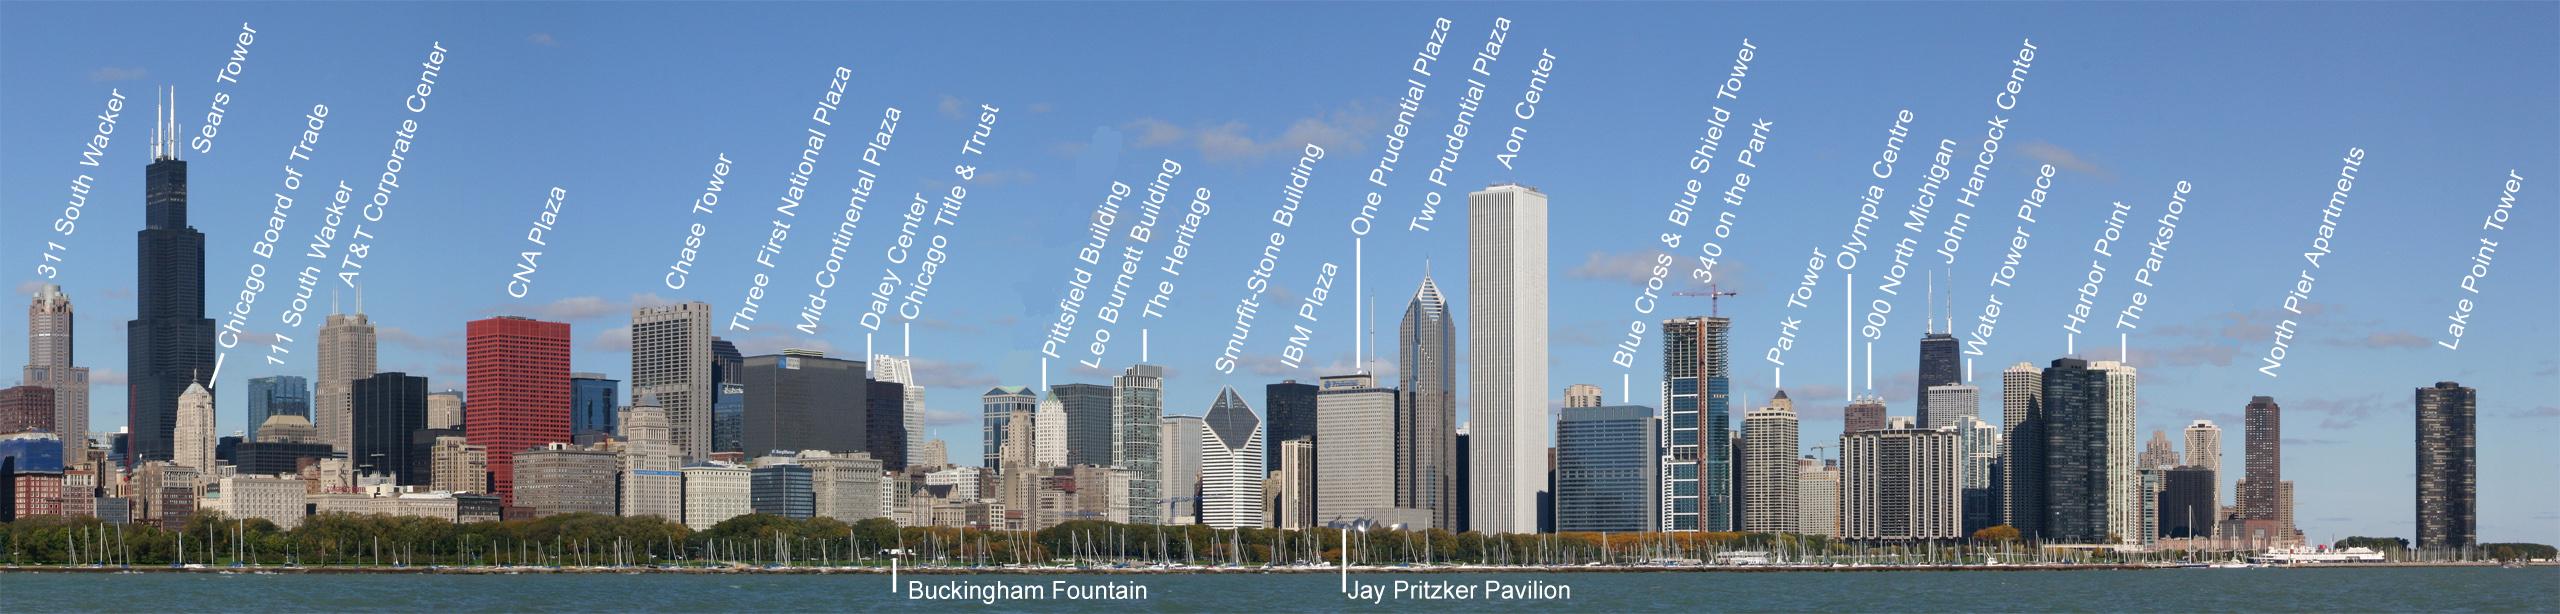 http://upload.wikimedia.org/wikipedia/commons/2/2c/Chicago_Skyline_Crop_Labeled_2560_ver2.jpg